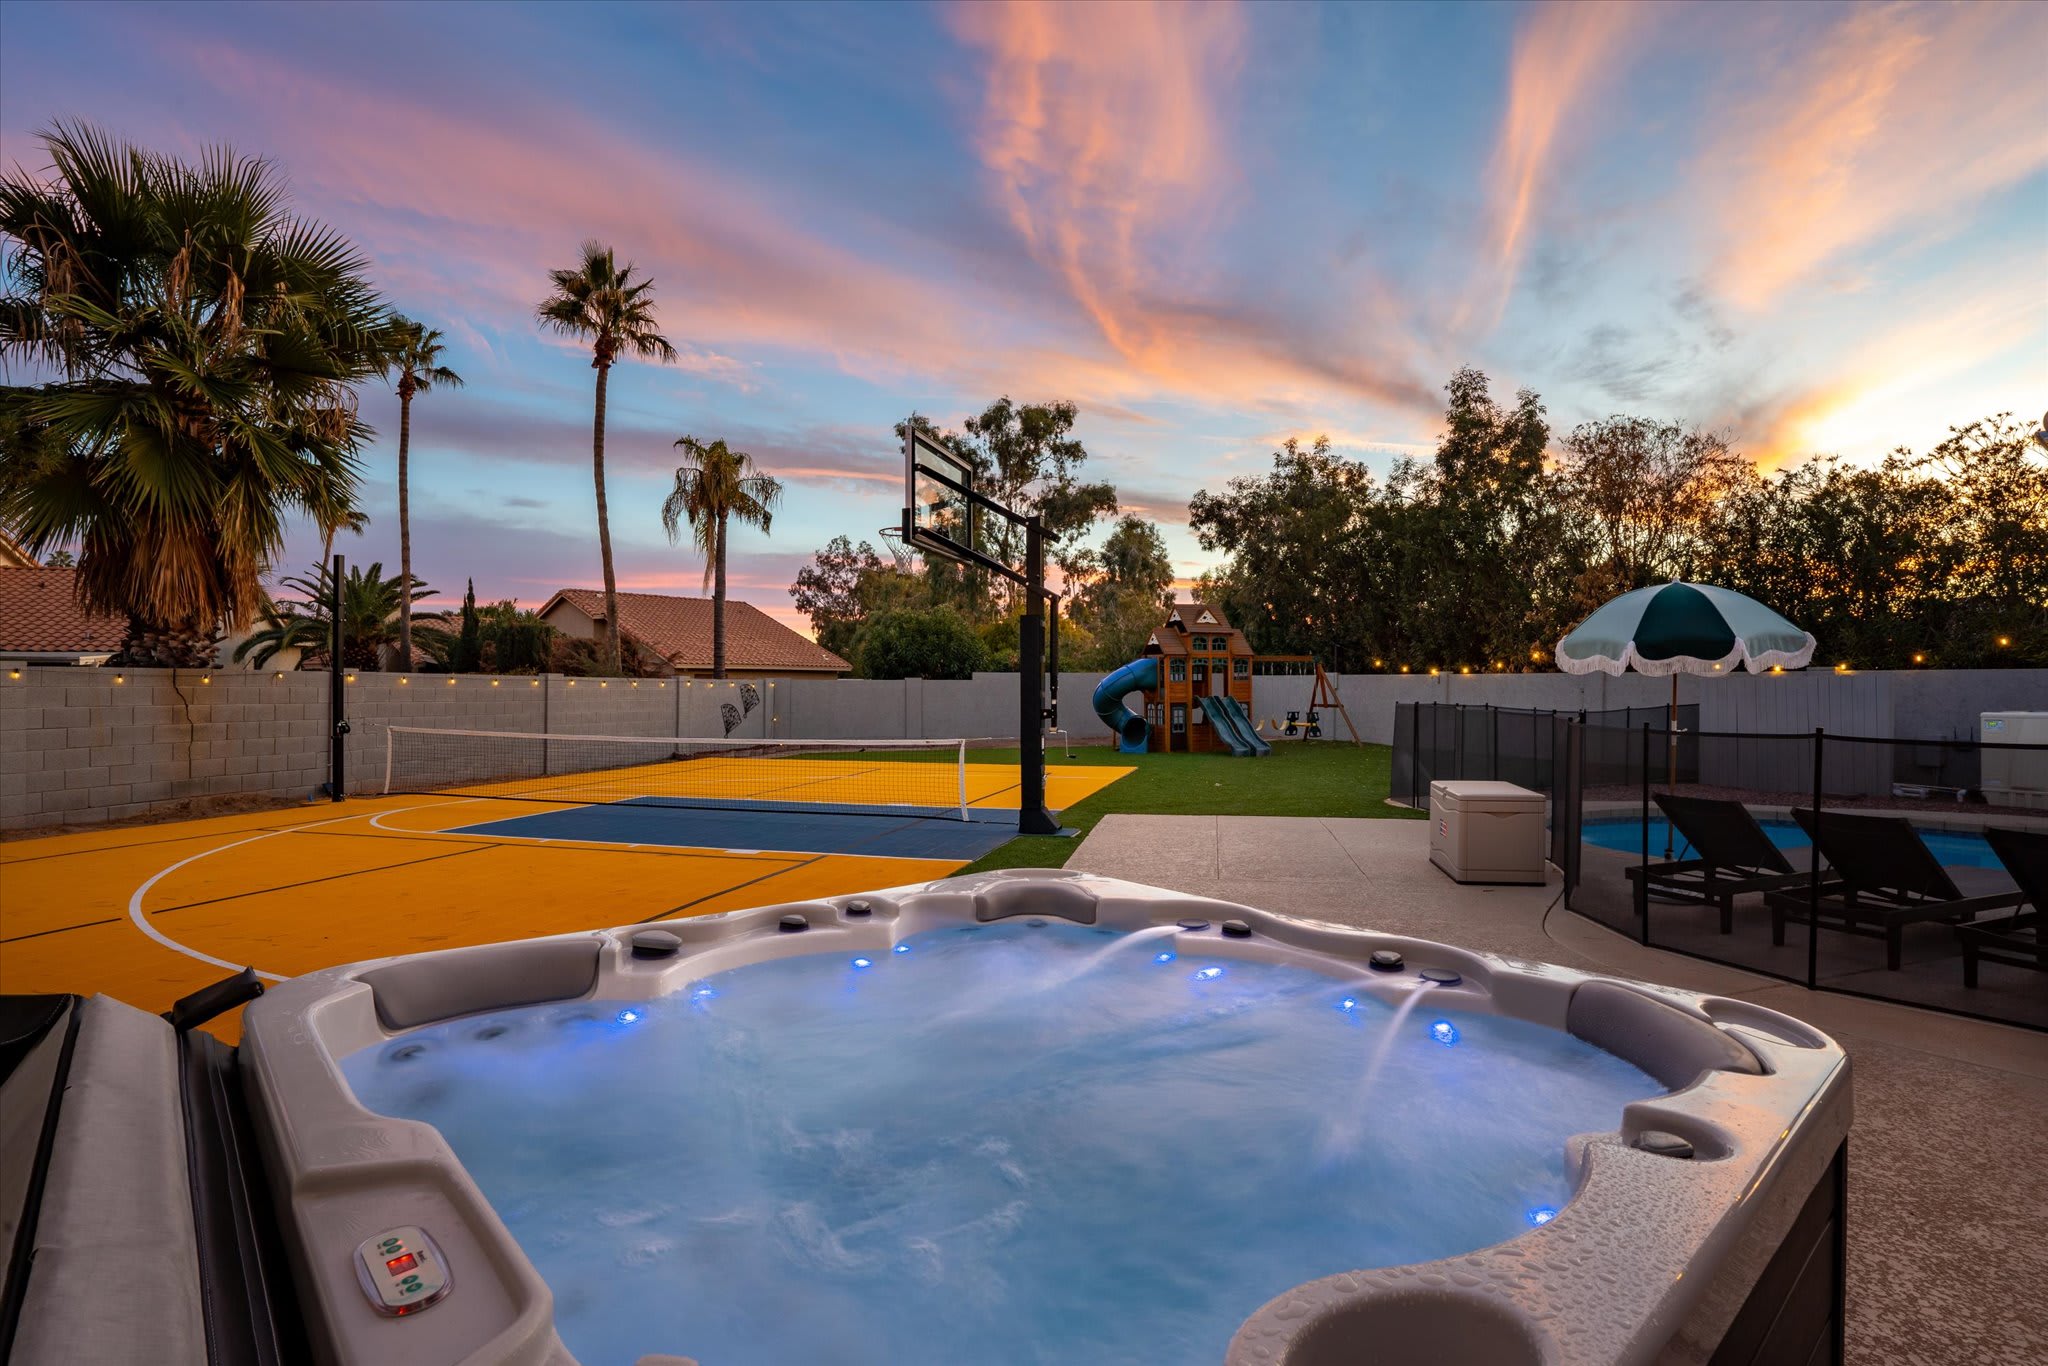 Take a dip in our brand new hot tub while watching the sunset